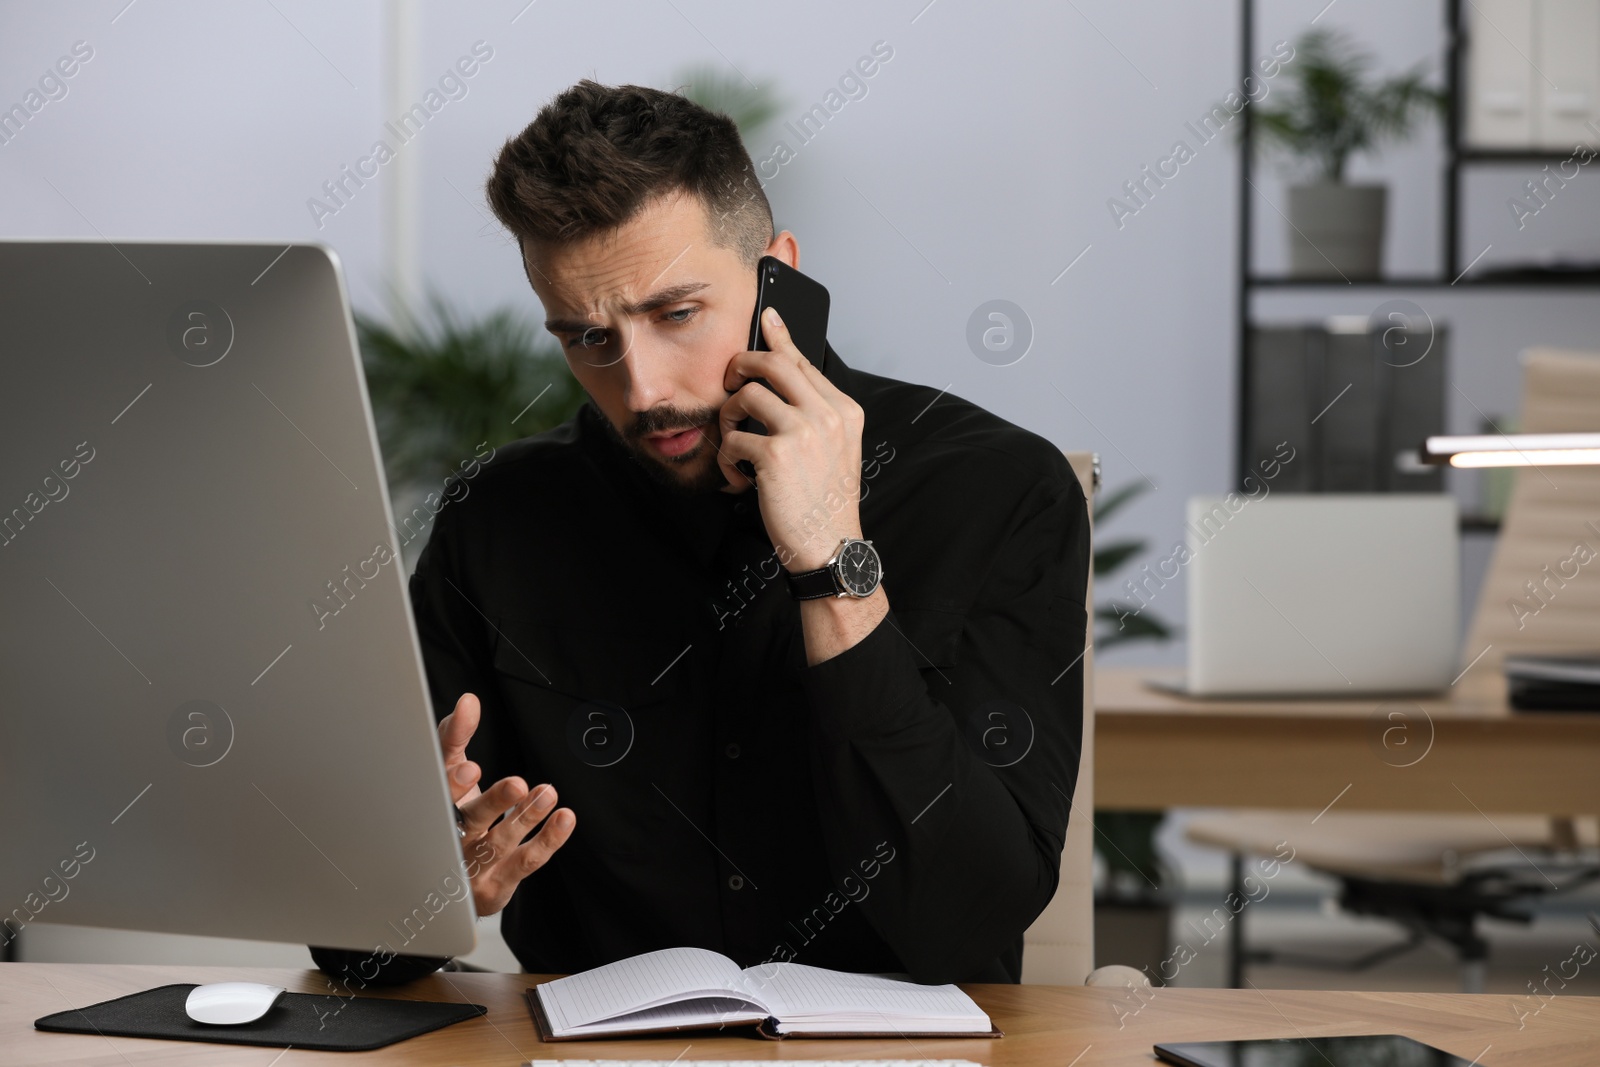 Photo of Man talking on phone while working at table in office